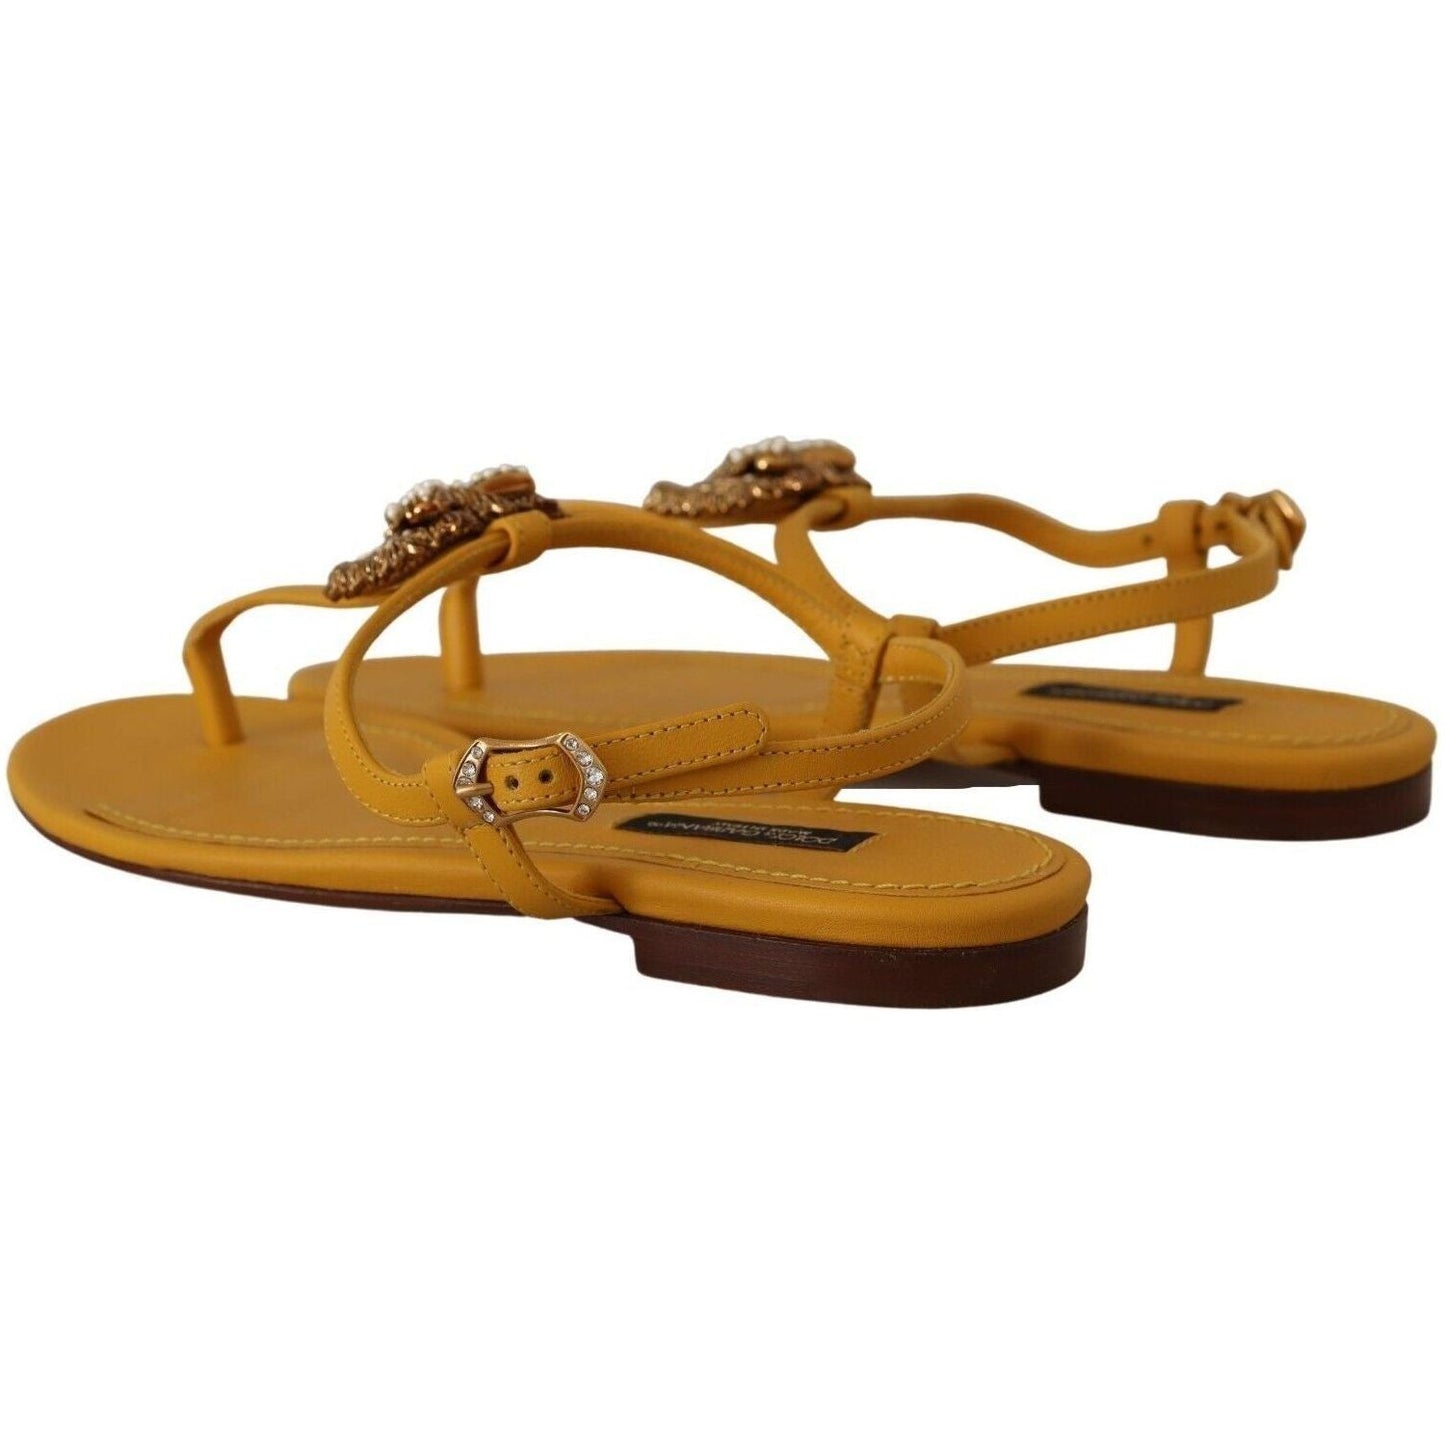 Dolce & Gabbana Mustard T-Strap Flat Sandals with Heart Embellishment mustard-leather-devotion-flats-sandals-shoes